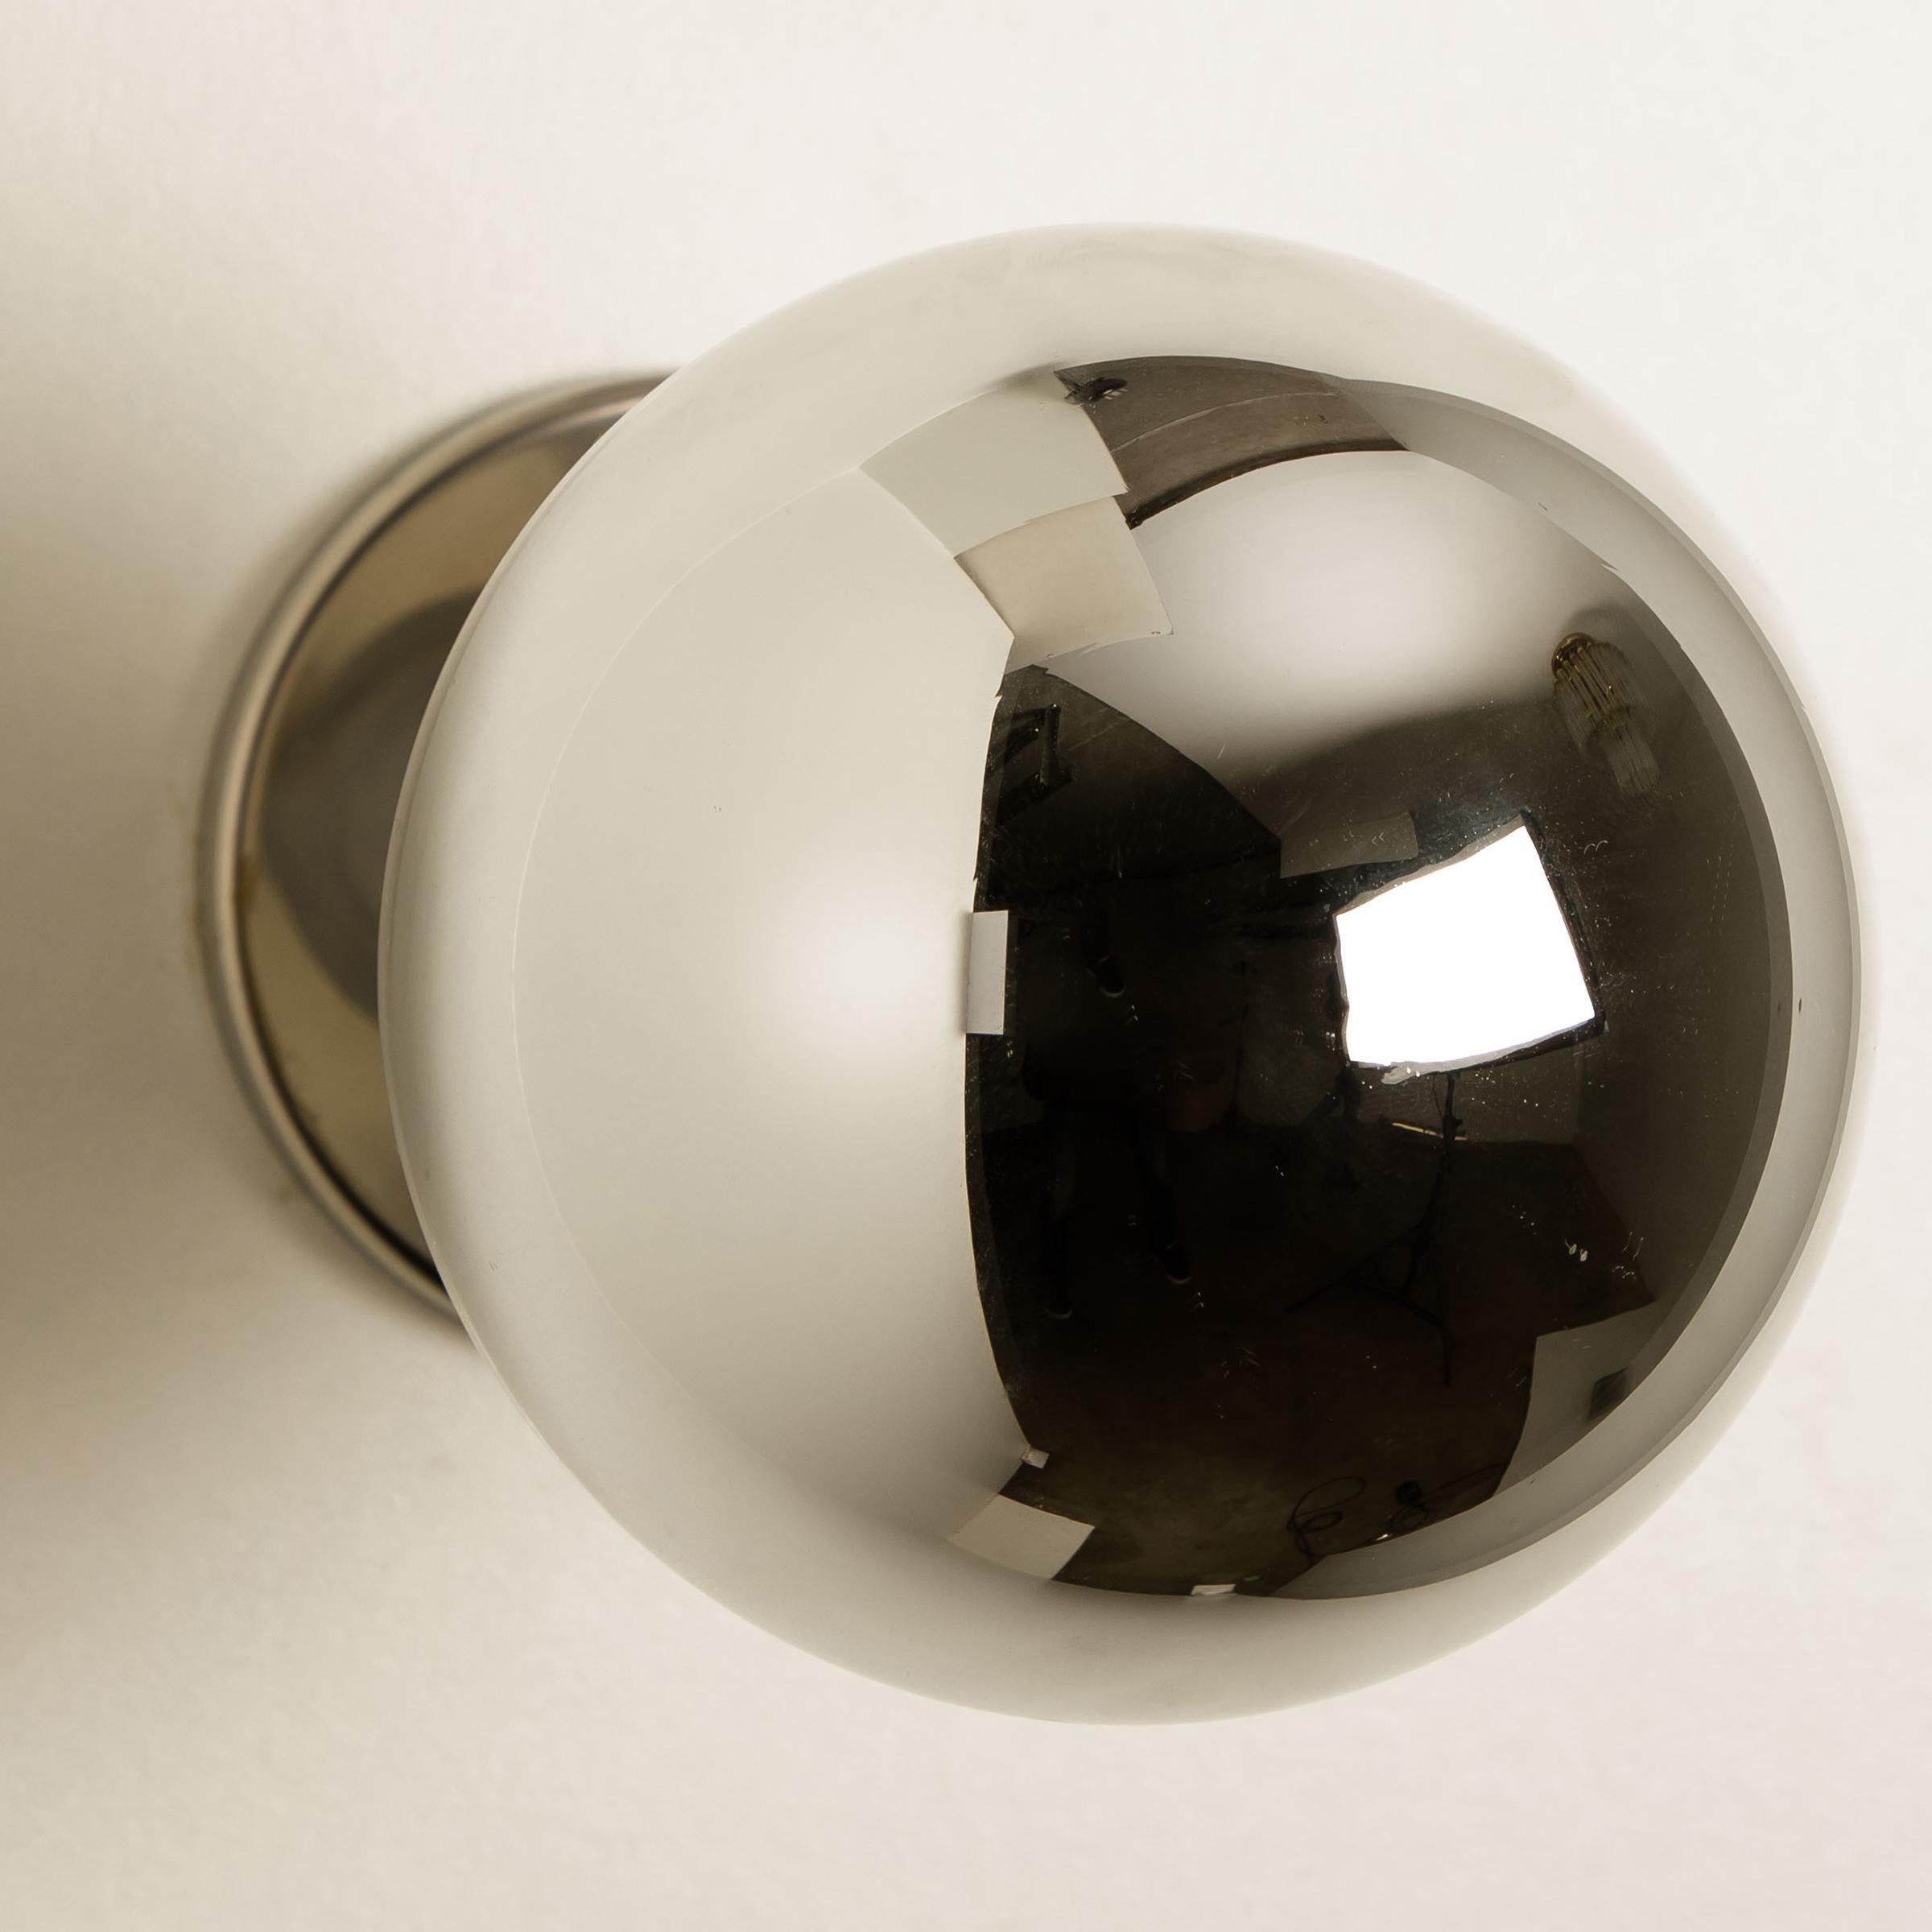 Chrome One of the Six Wall Lamps by Motoko Ishii for Staff, 1970s